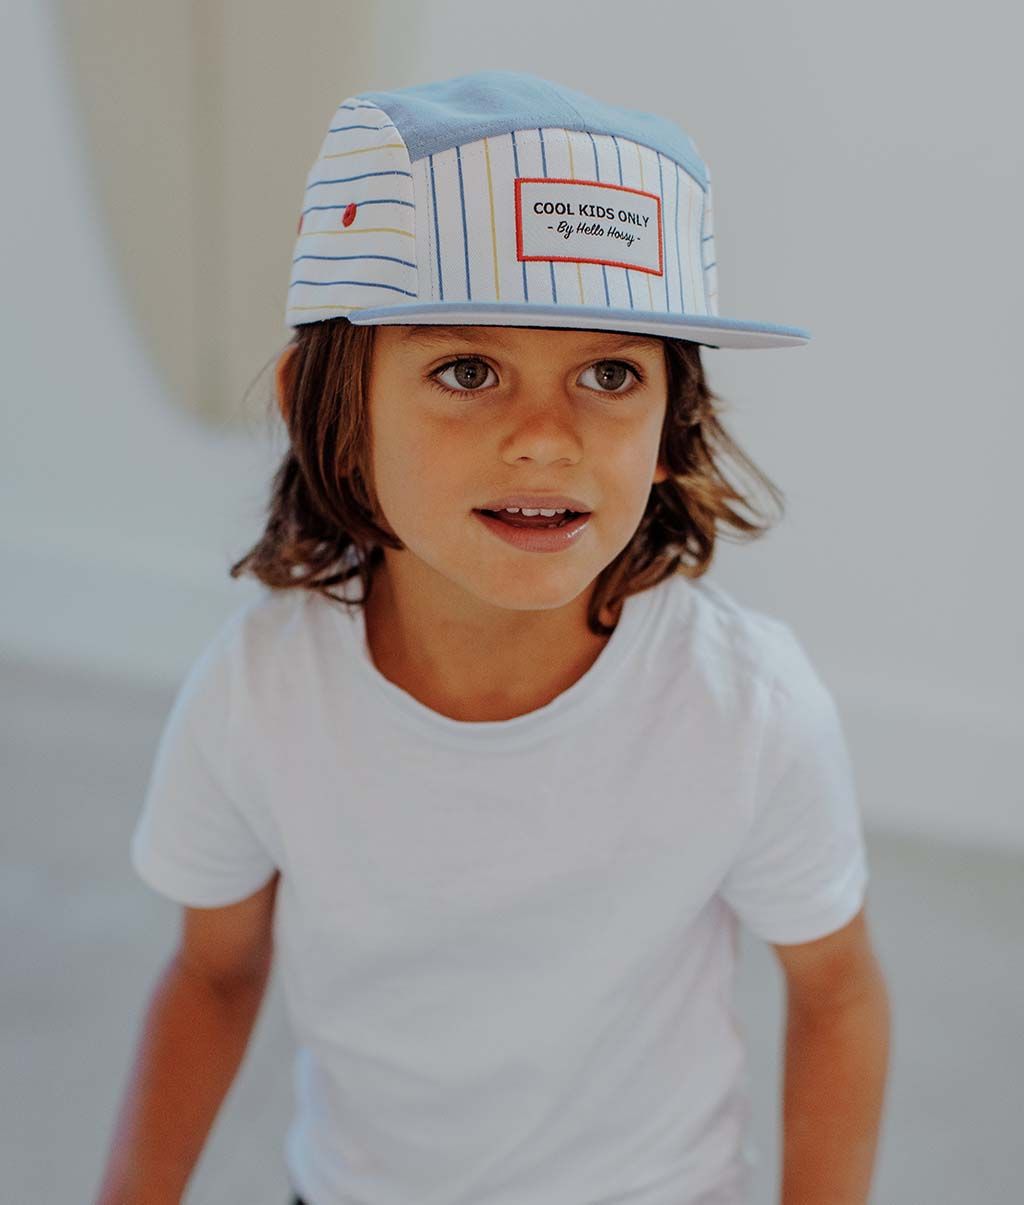 Hello Hossy "Cool Kids only" Cap Mini Me Marin